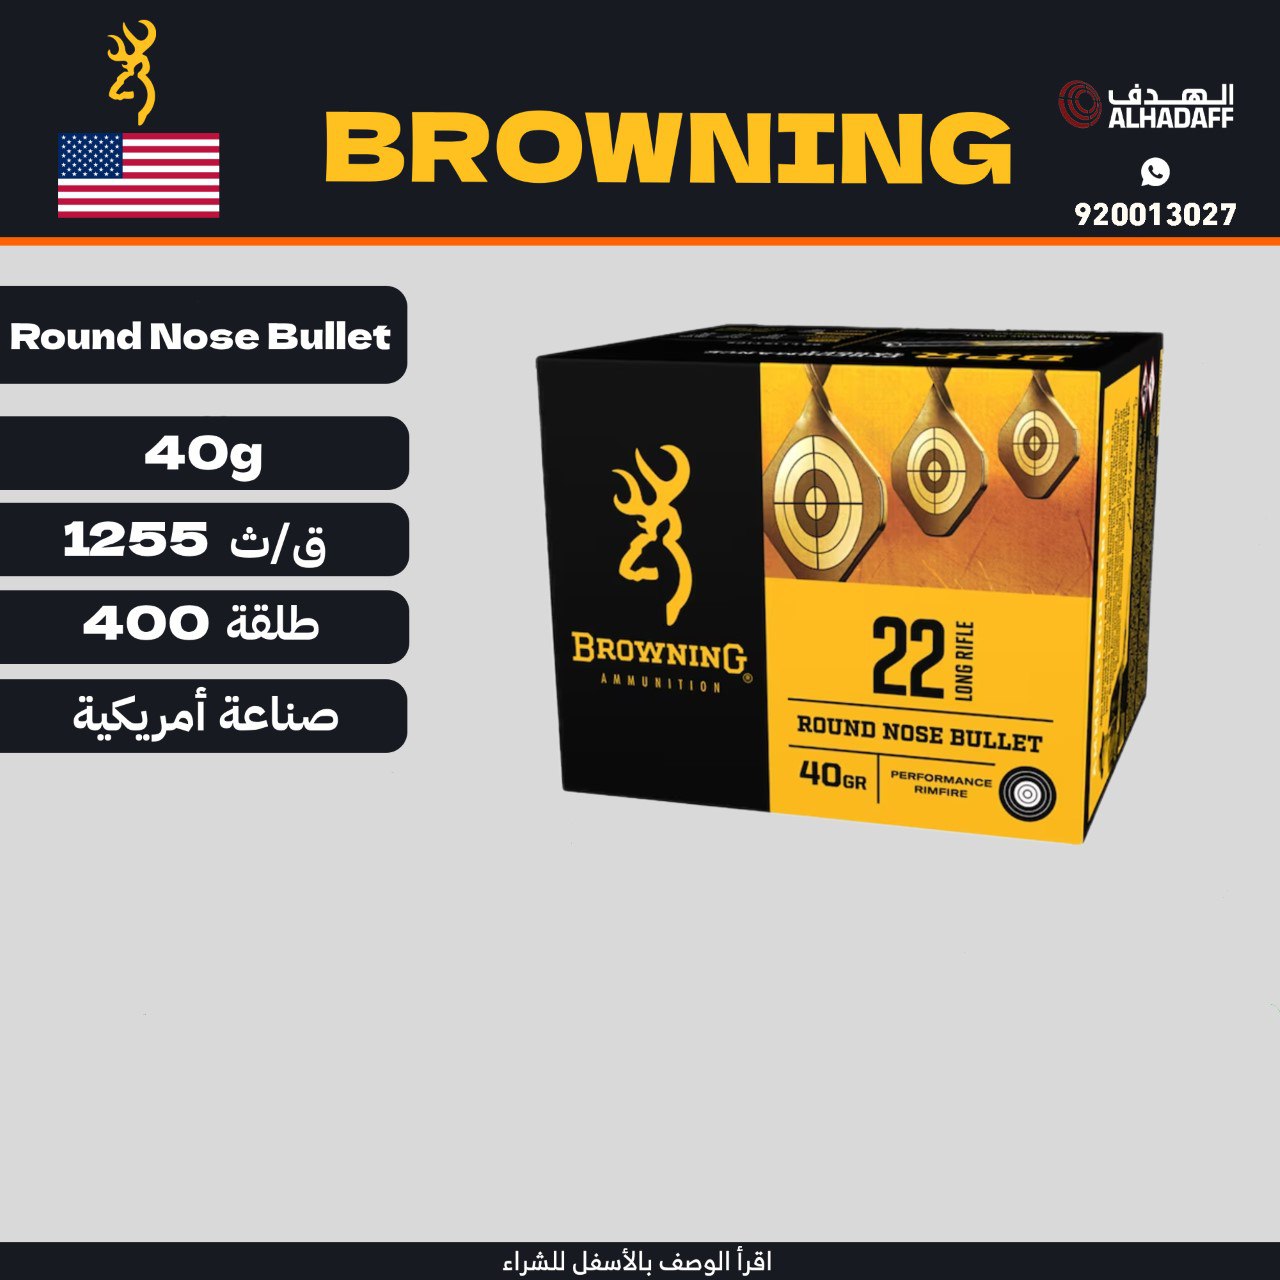 Browning 22 LR 40 gr Round Nose Bullet BPR Performance 400 RoundS